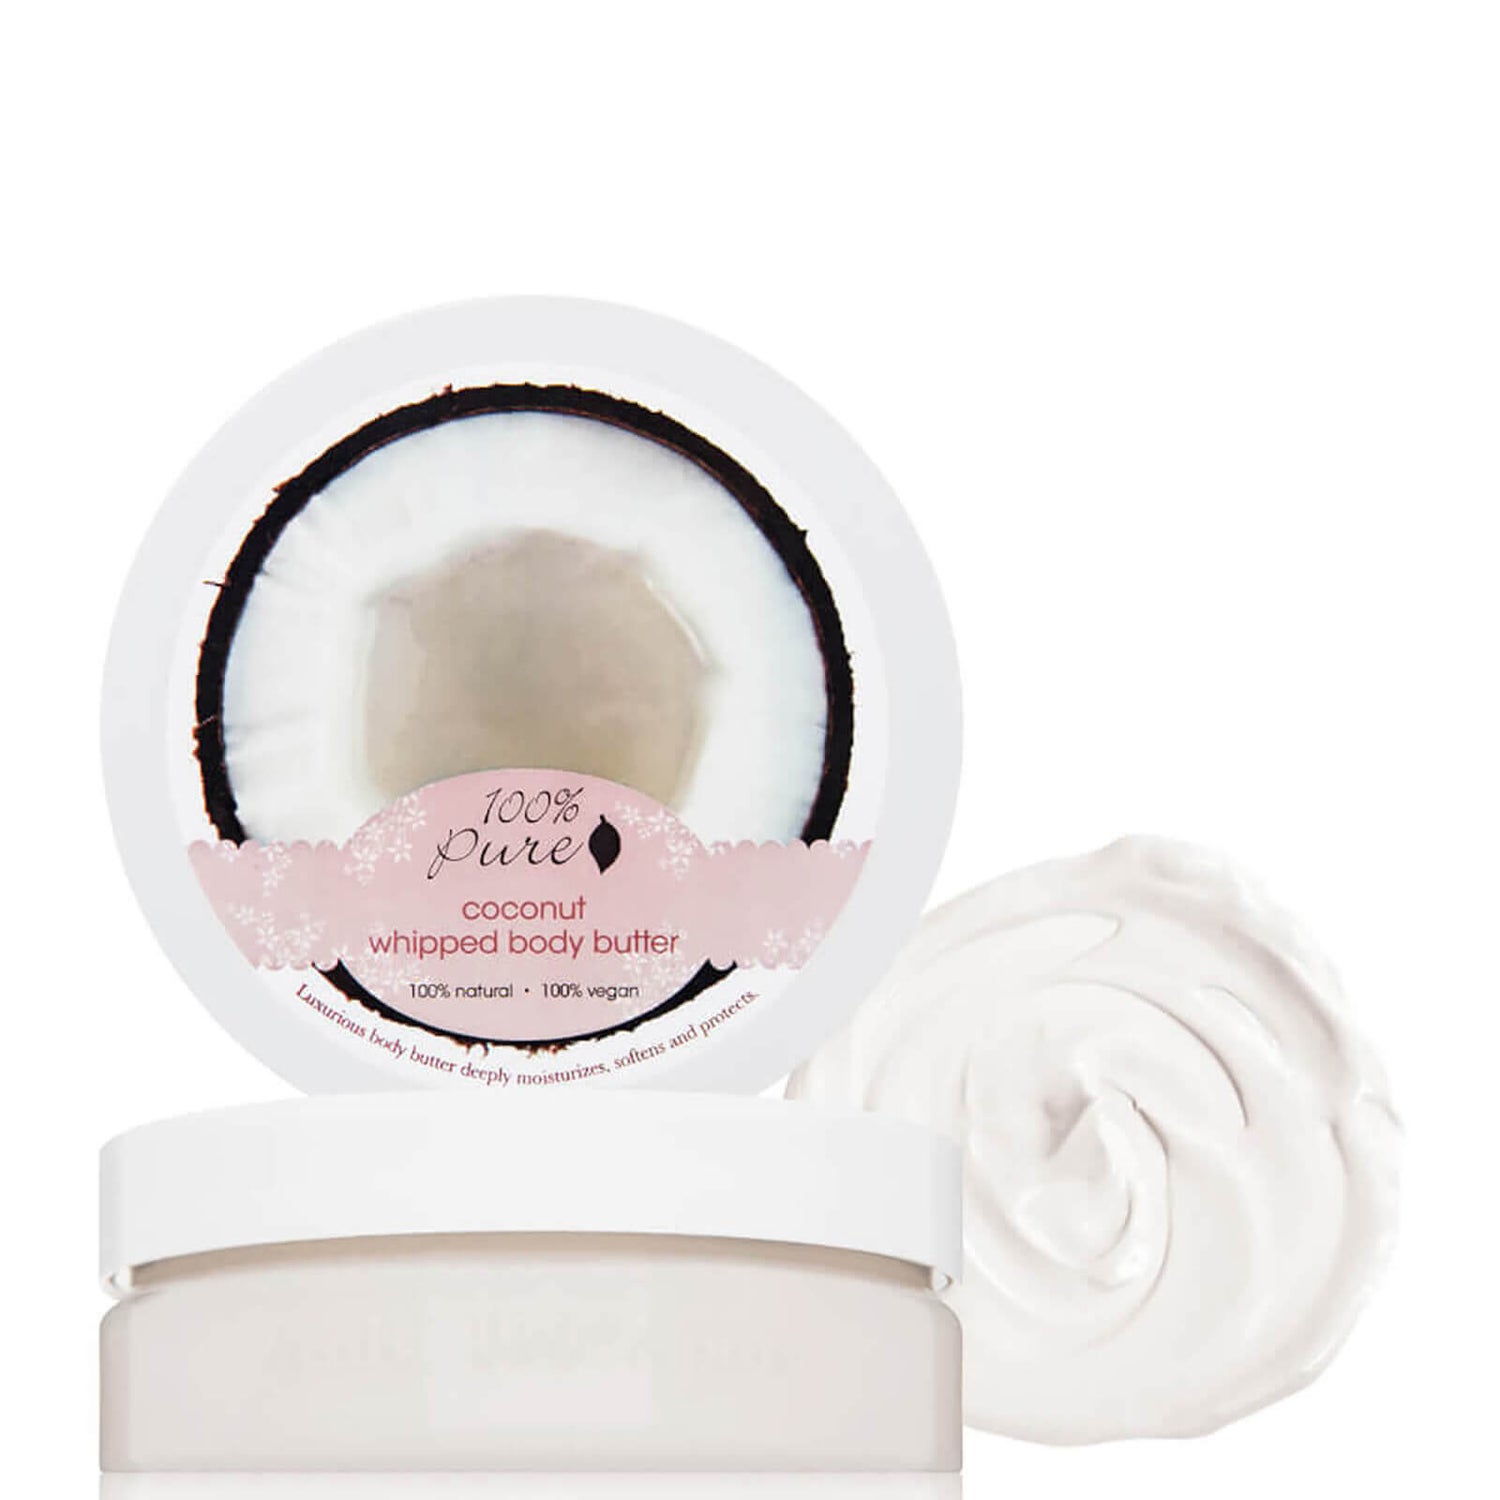 100% Pure Whipped Body Butter - Coconut (3.4 oz.)